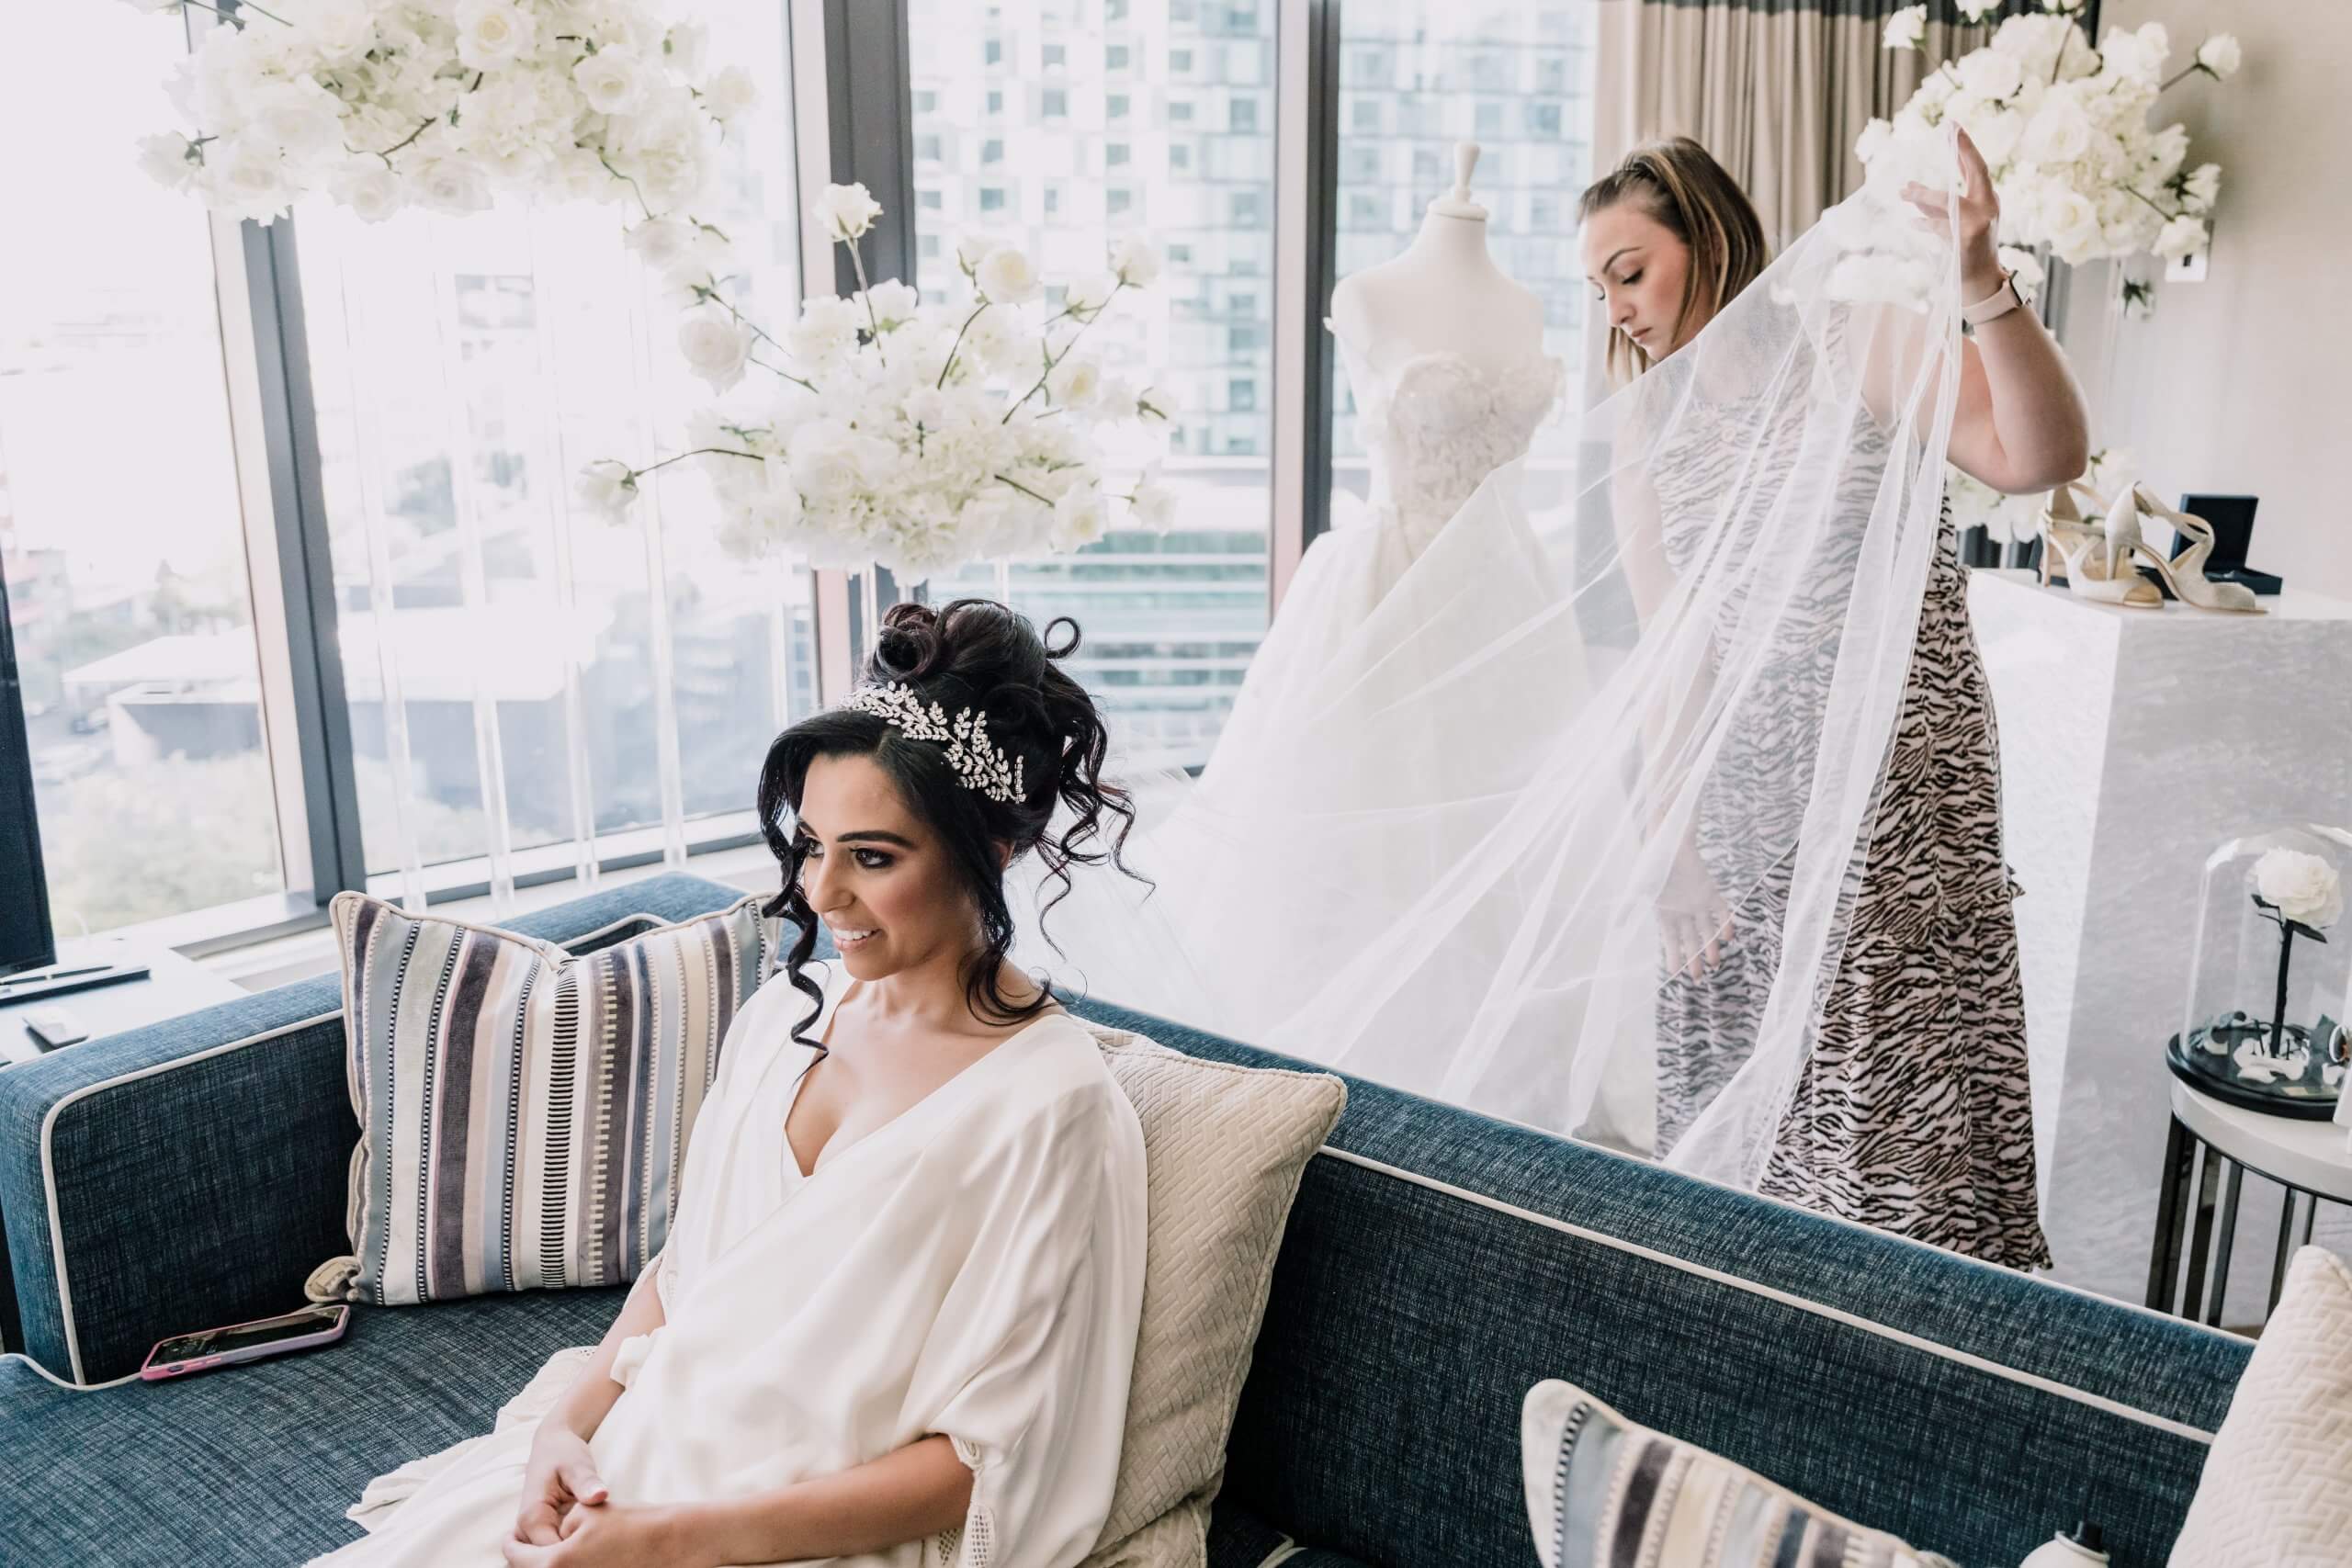 The bride is sitting on a couch, wearing her wedding robe and getting ready.